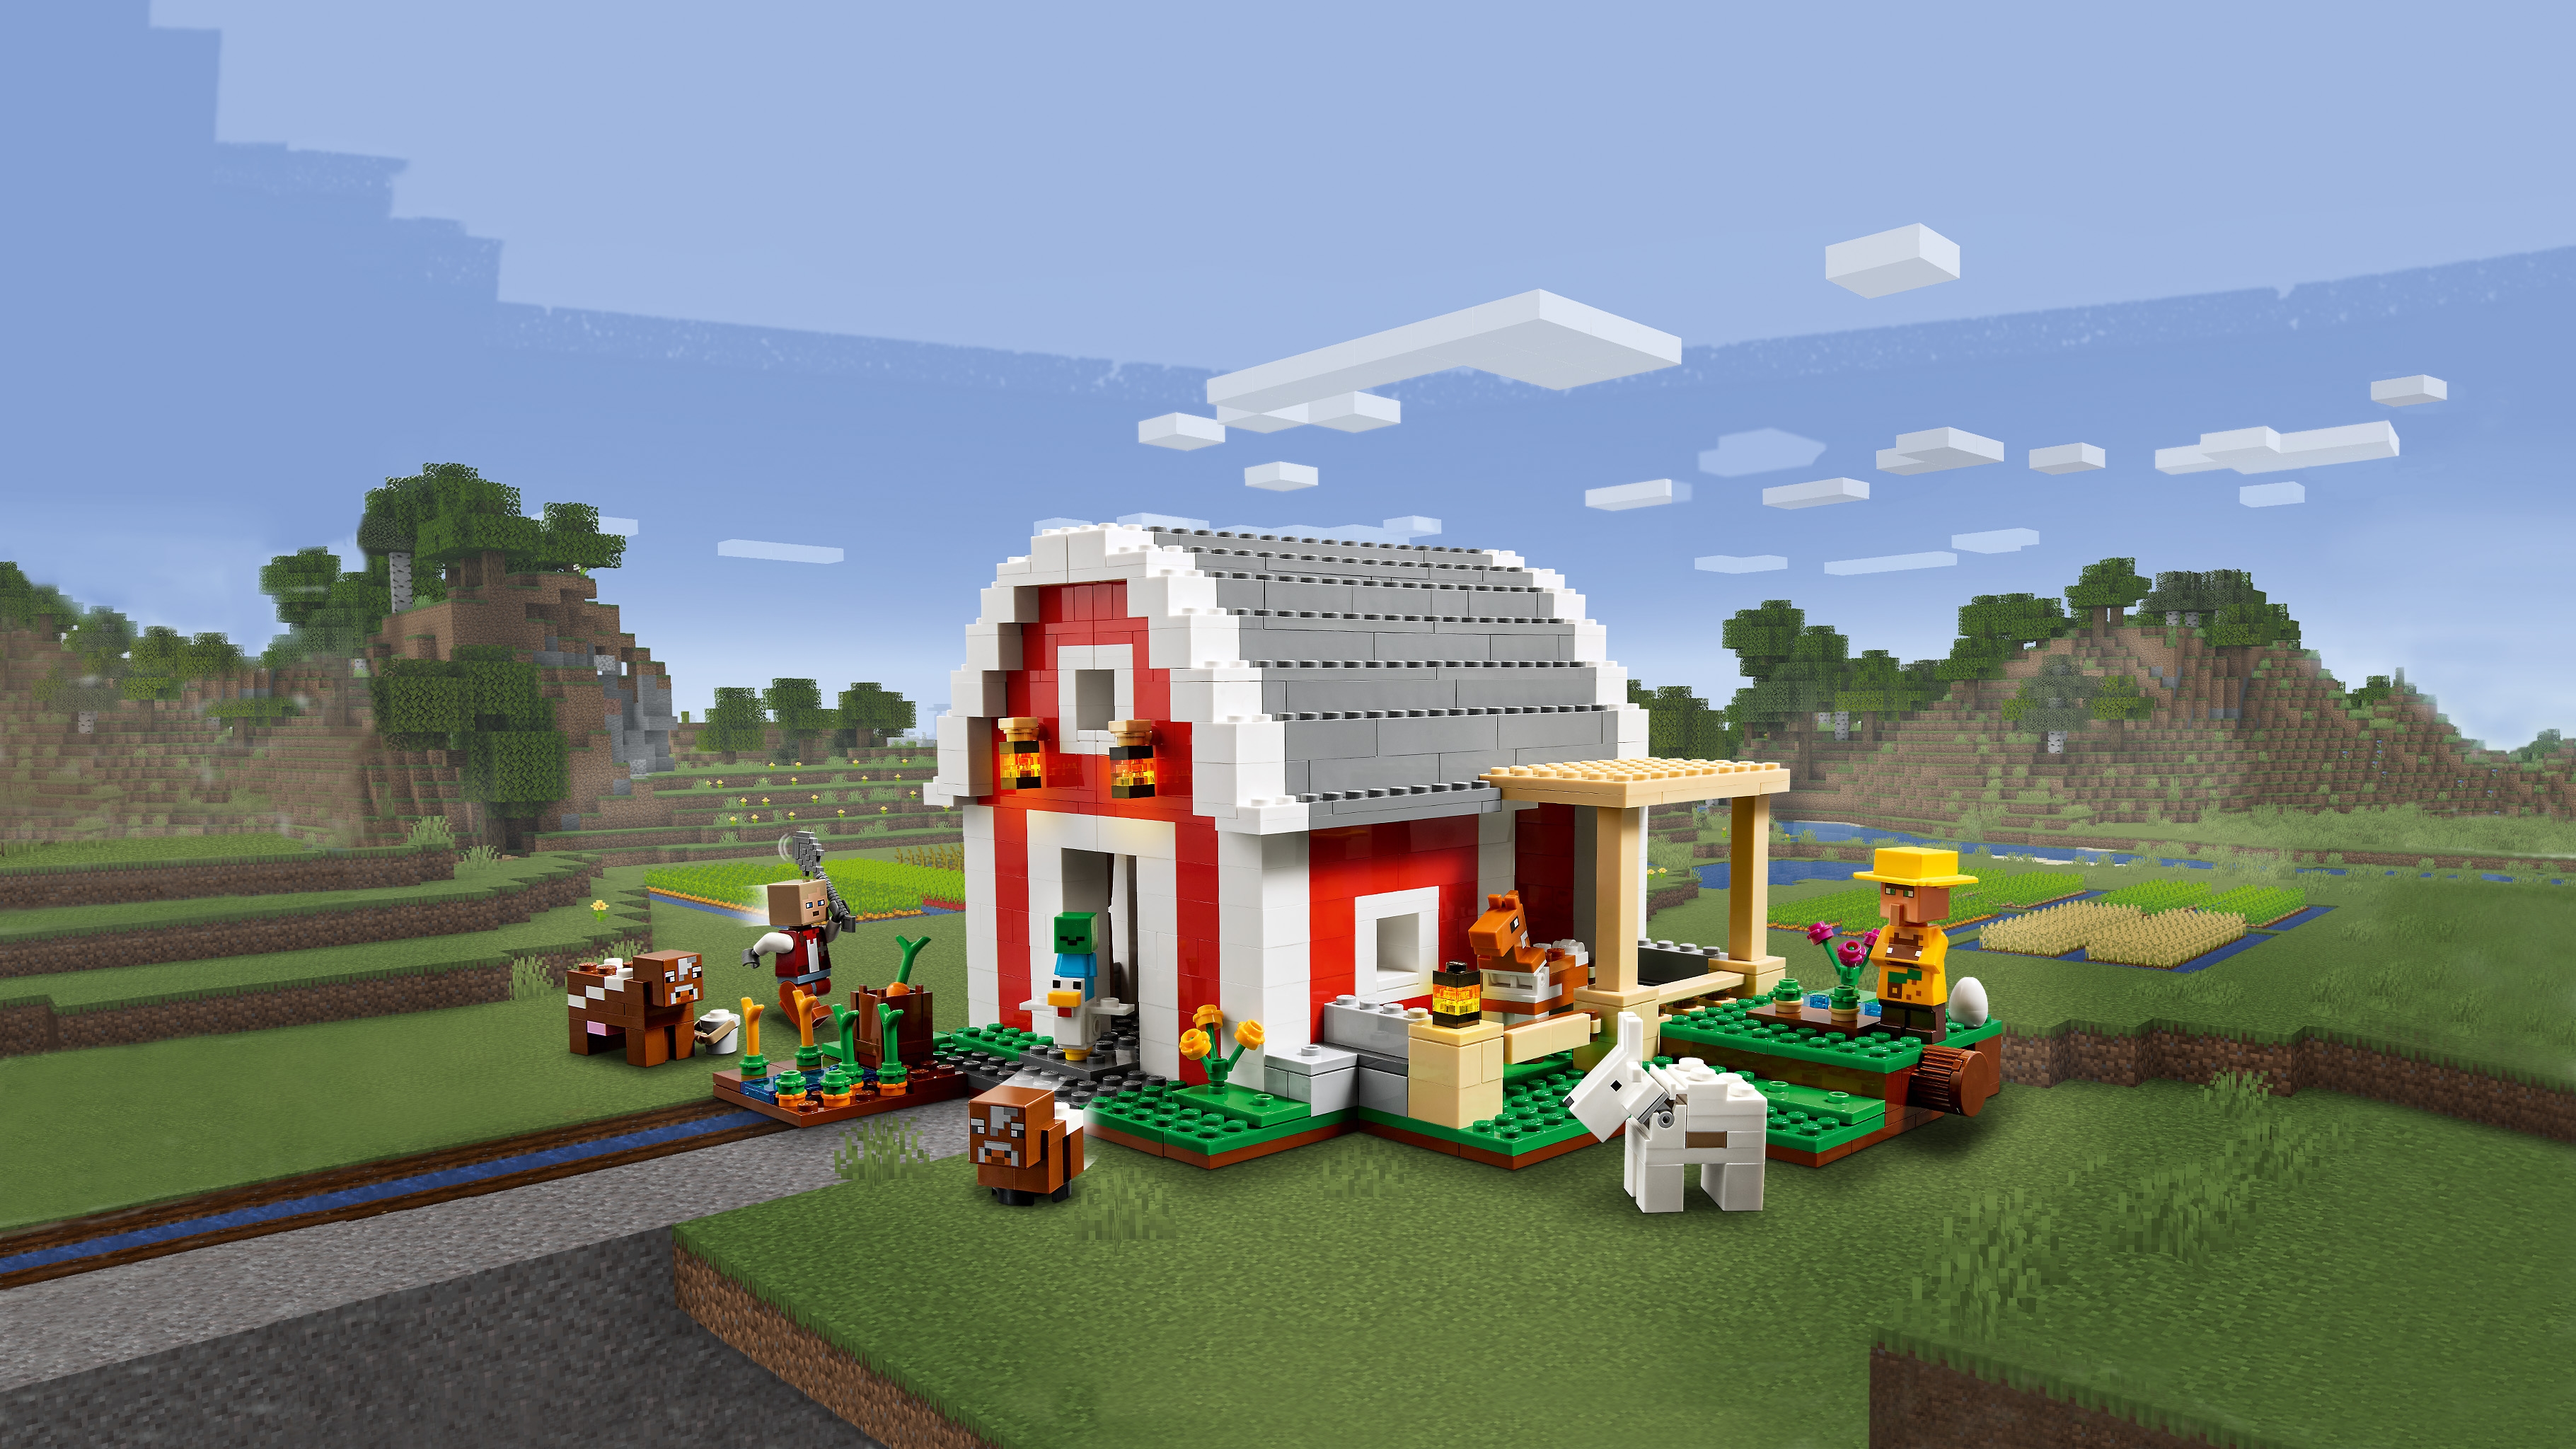 The Red Barn 21187 - Sets LEGO.com for kids